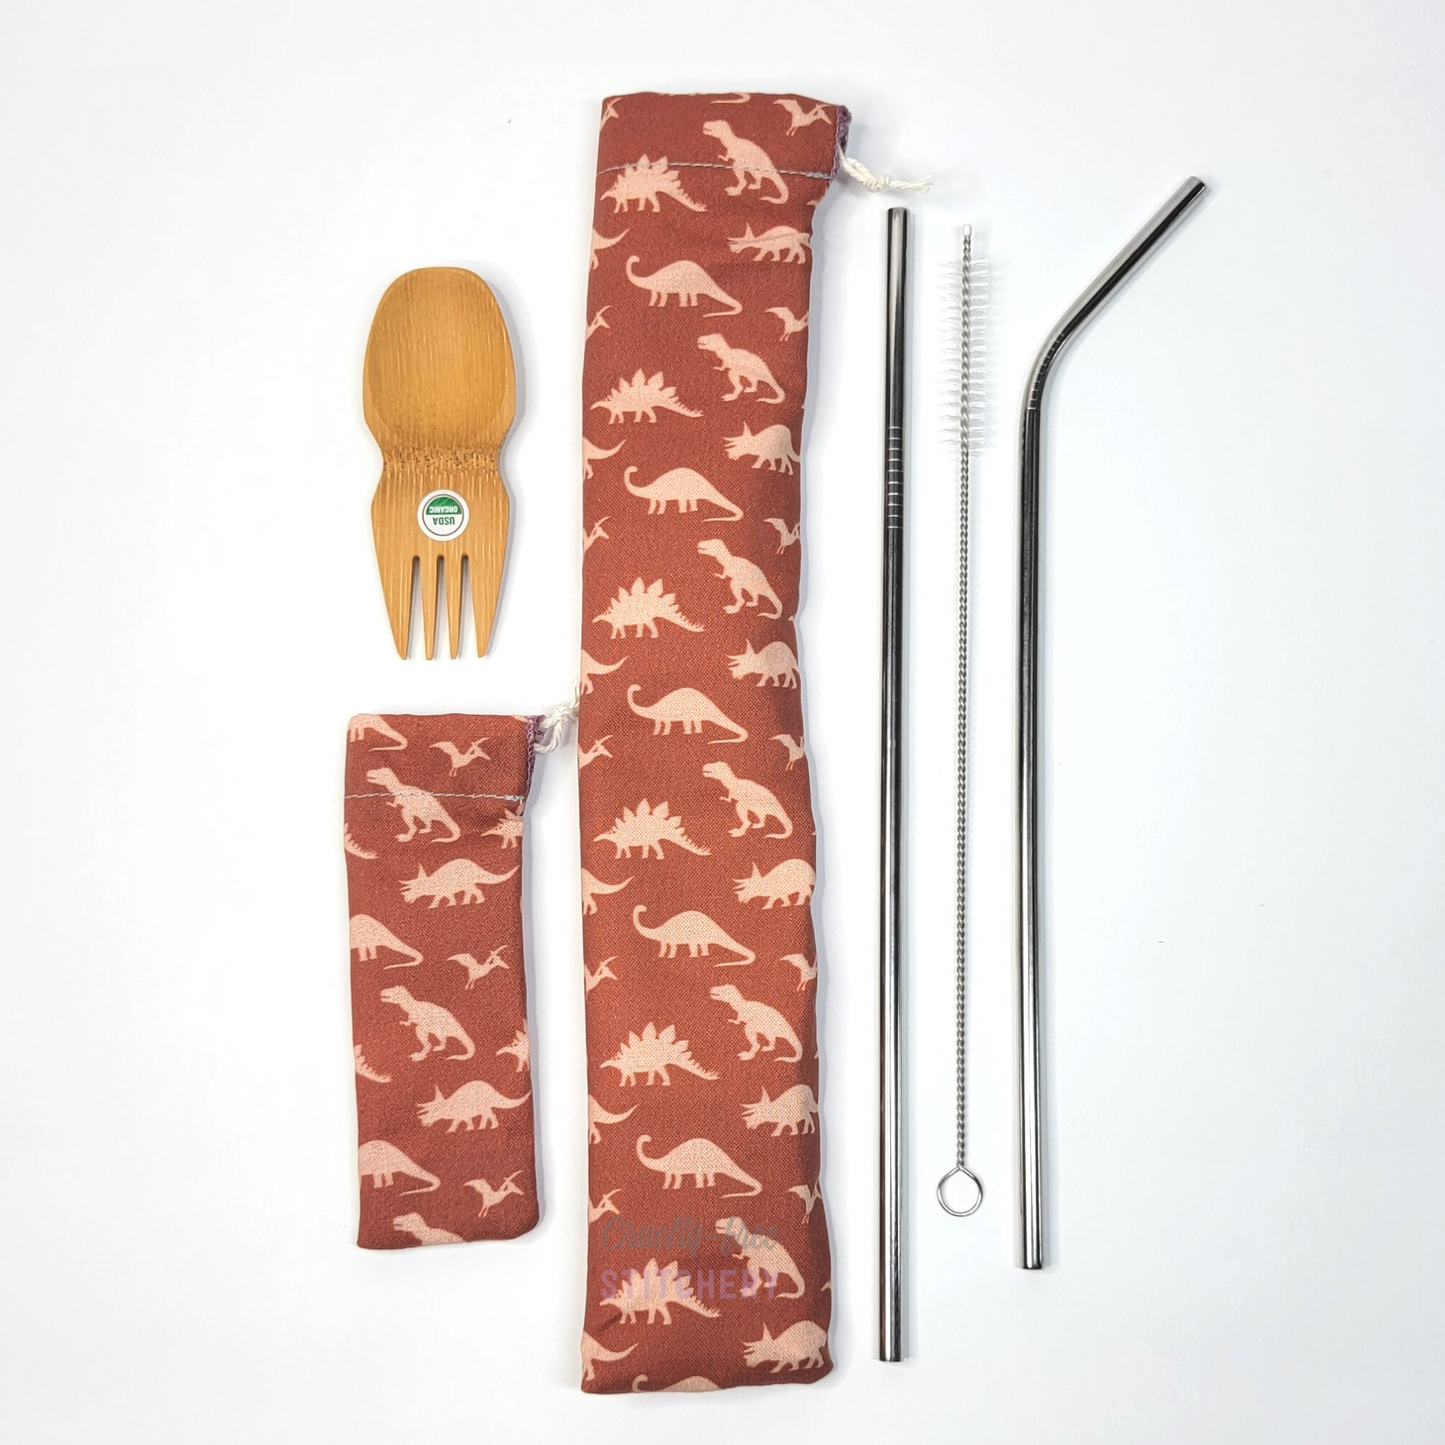 All contents of this bundle, a bamboo spork, dinosaur print spork pouch, dinosaur print straw pouch, and stainless steel straw set.